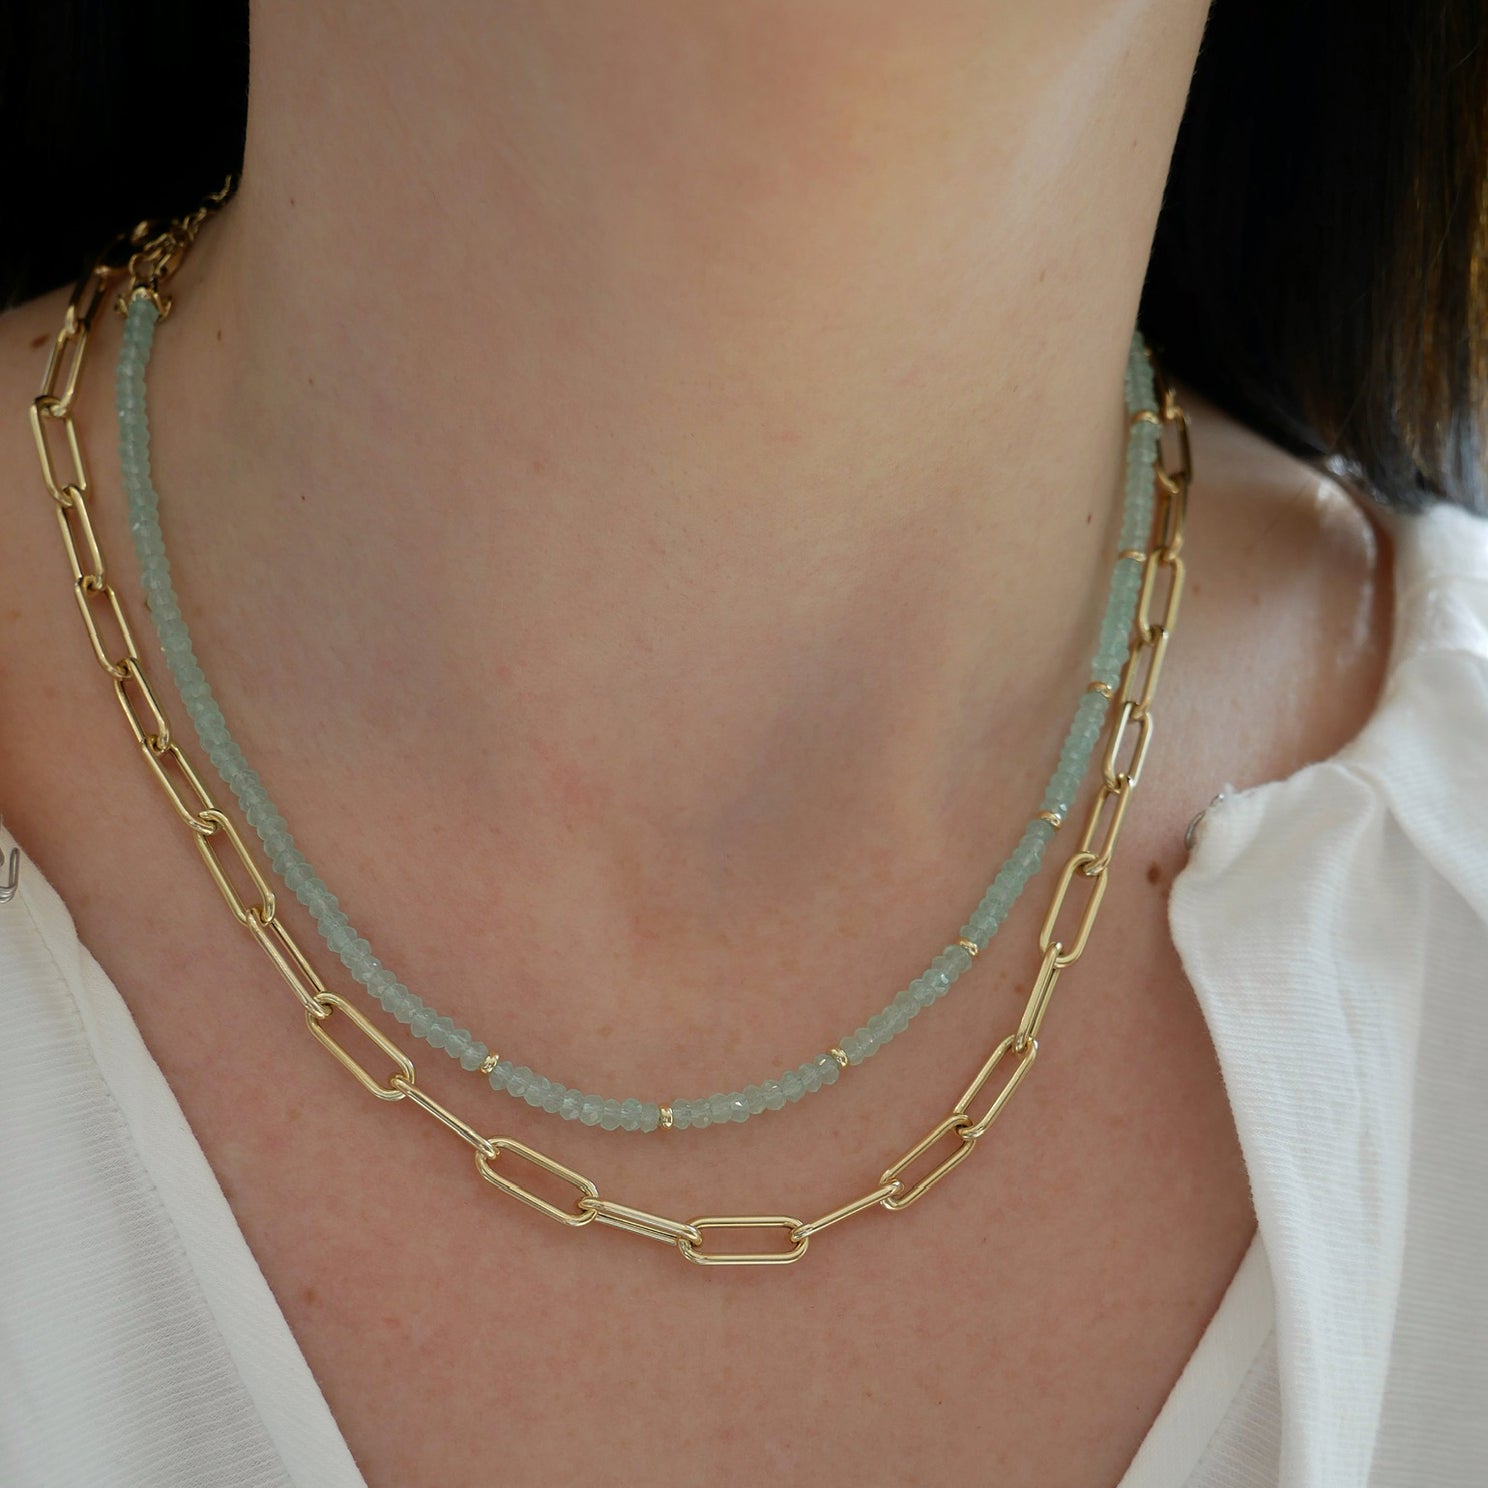 Birthstone Bead Necklace In Chalcedony styled on neck of model with gold lola chain necklace